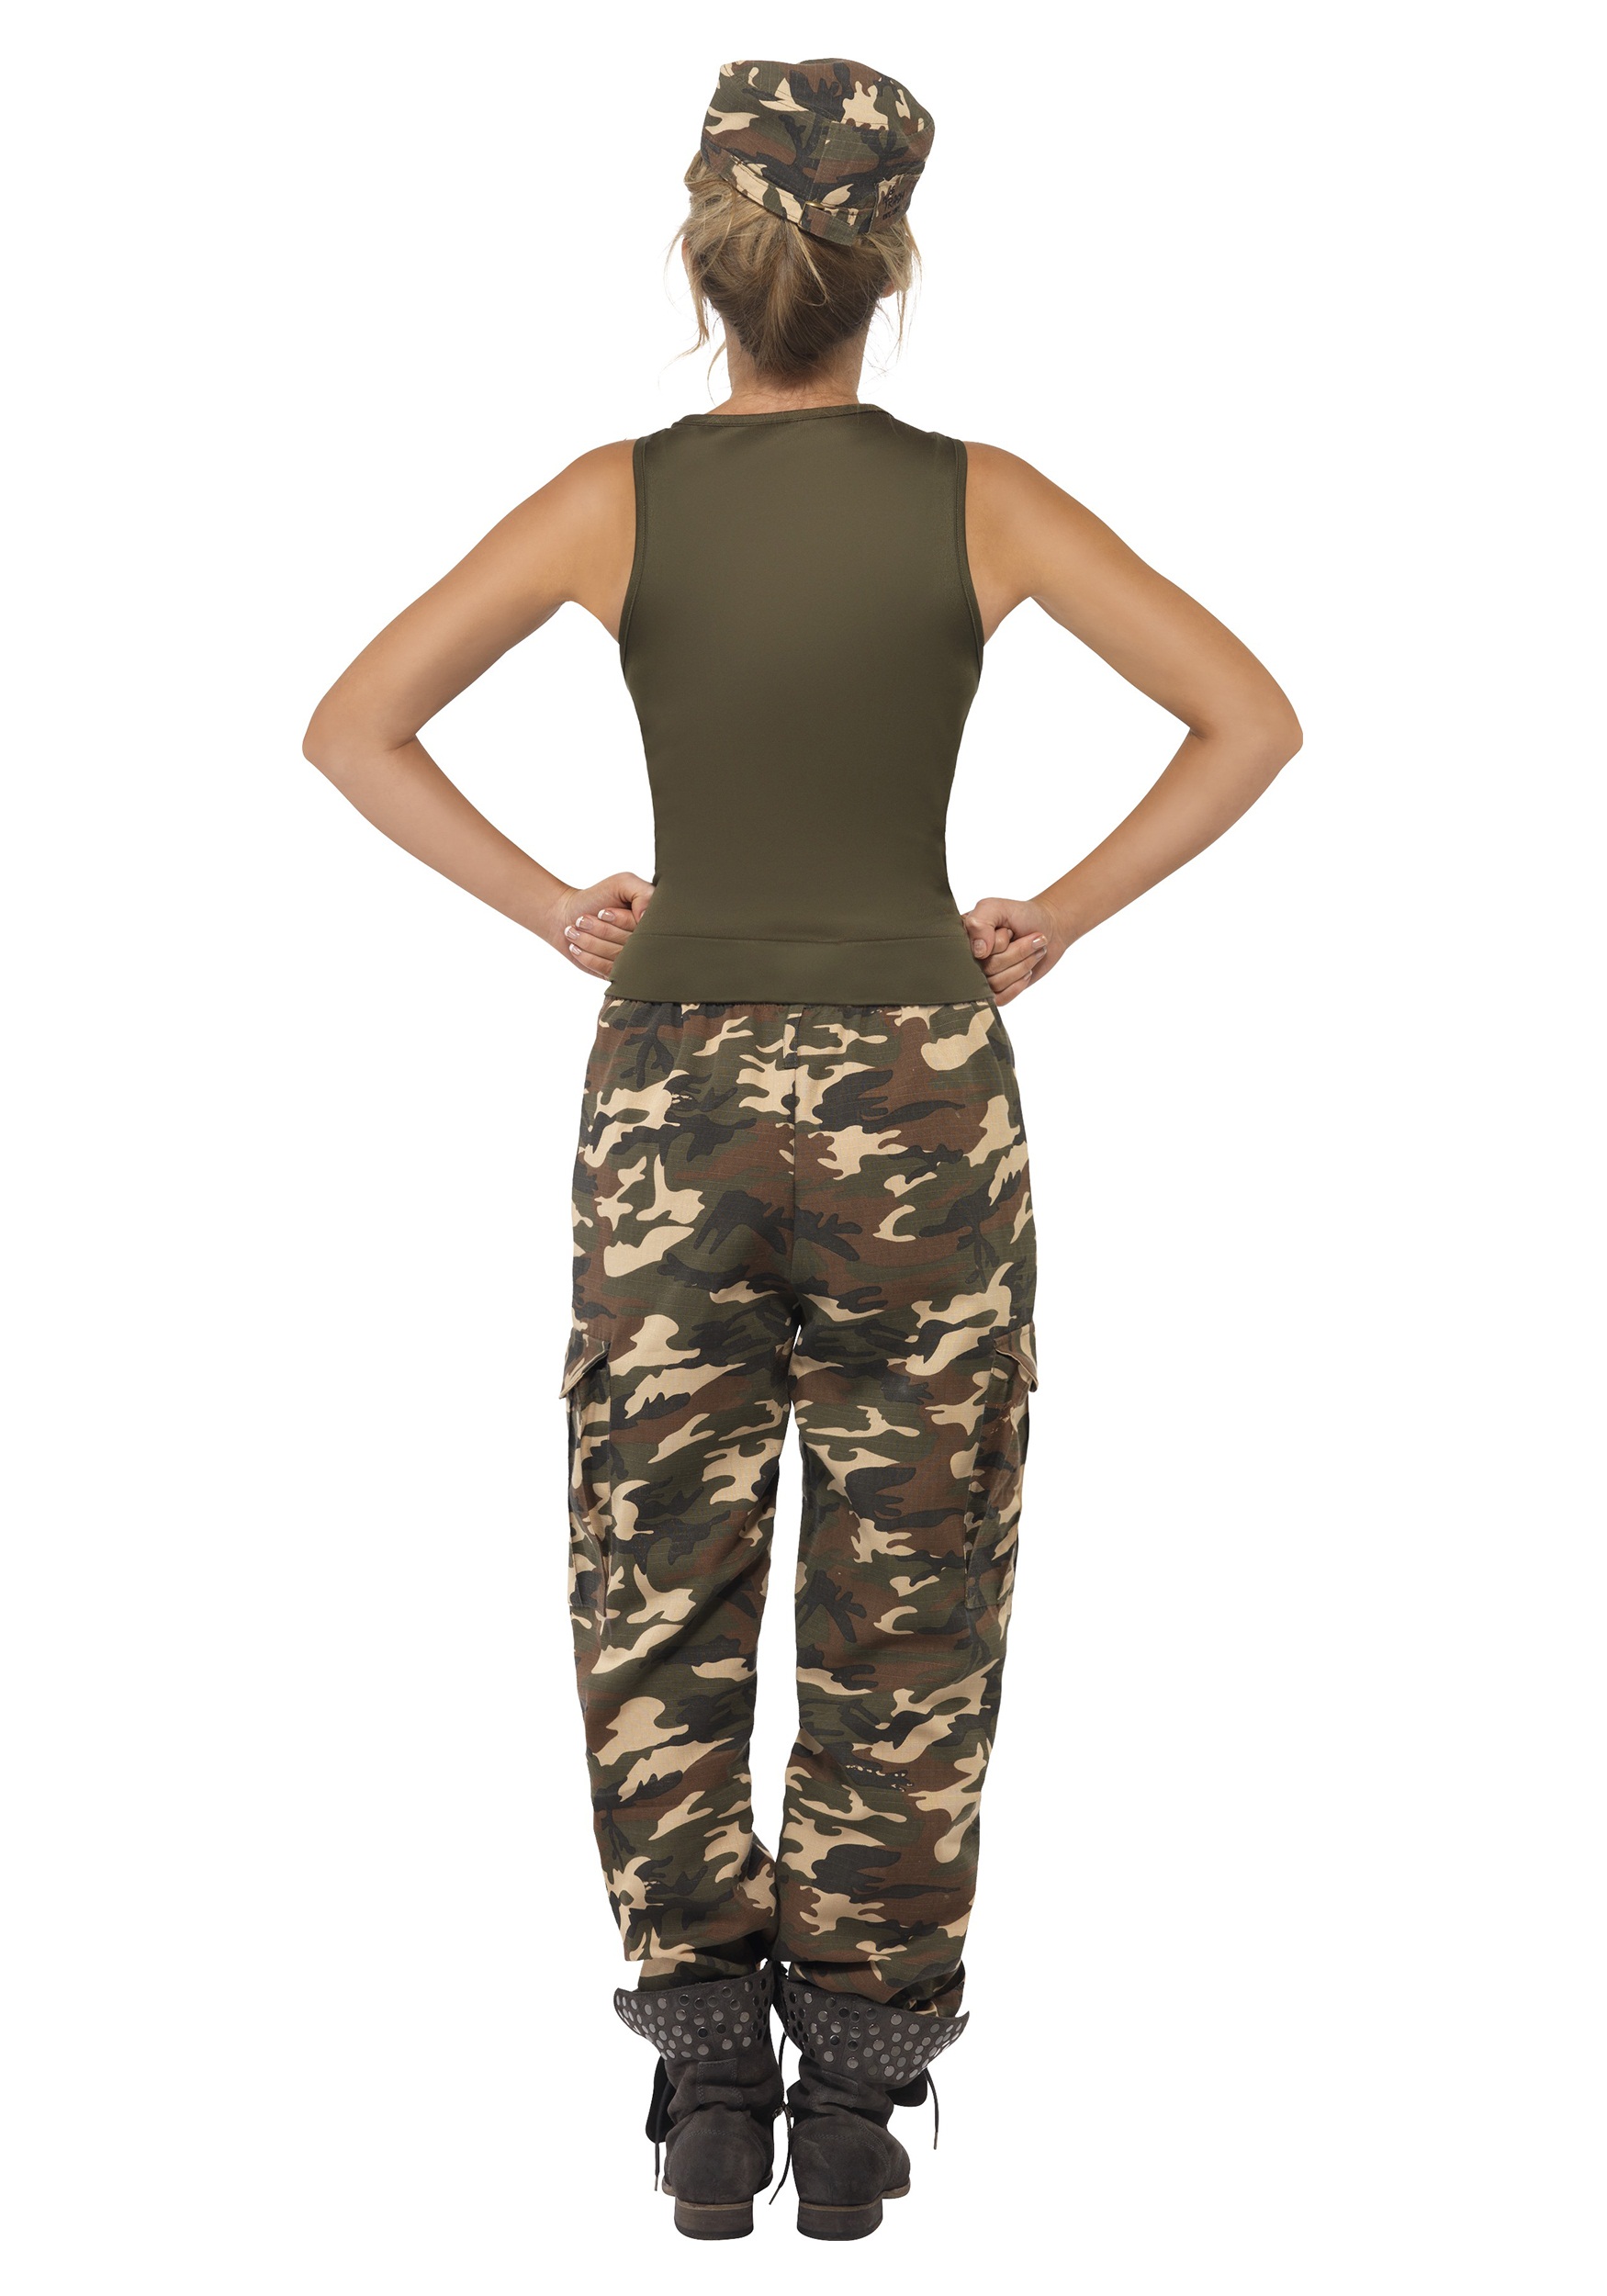 Womens Camo Fatigues Soldier Costume